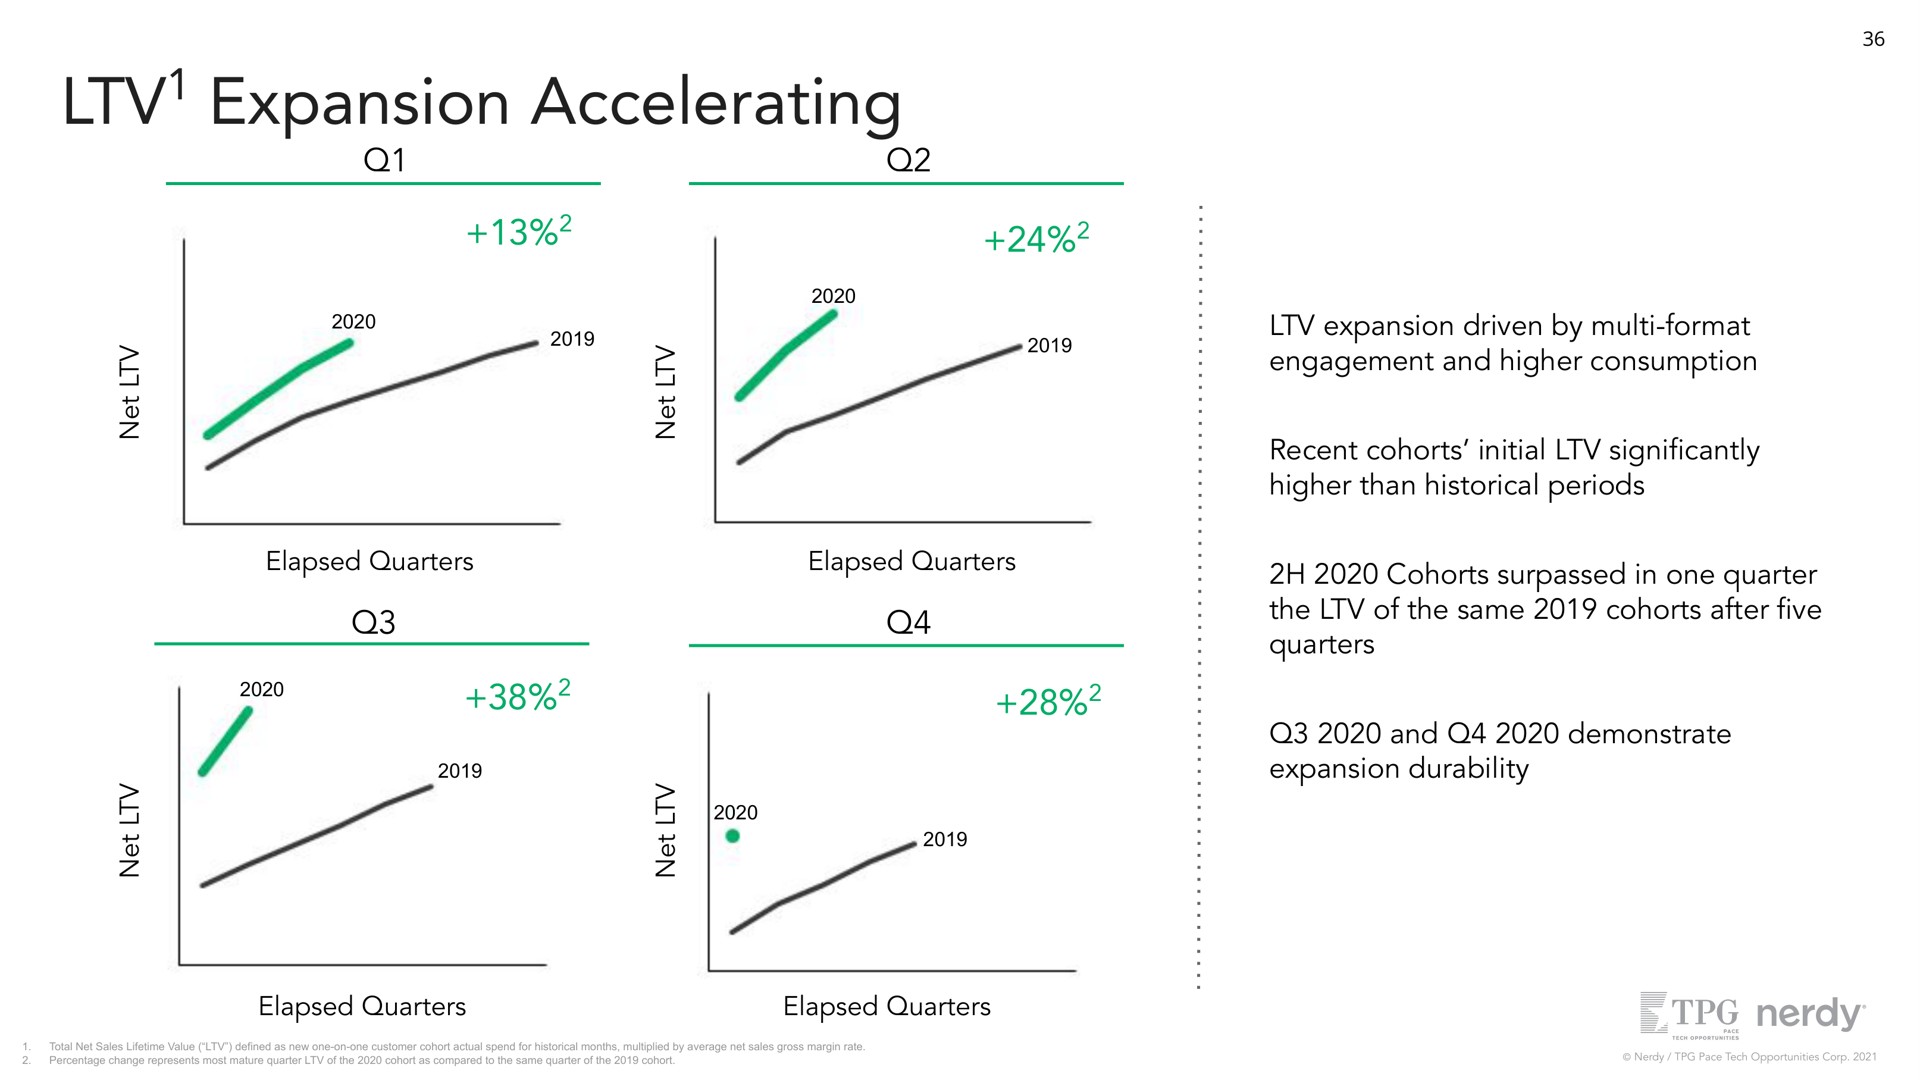 expansion accelerating elapsed quarters elapsed quarters expansion driven by format engagement and higher consumption recent cohorts initial higher than historical periods cohorts surpassed in one quarter the of the same cohorts after quarters and demonstrate expansion durability elapsed quarters elapsed quarters | Nerdy